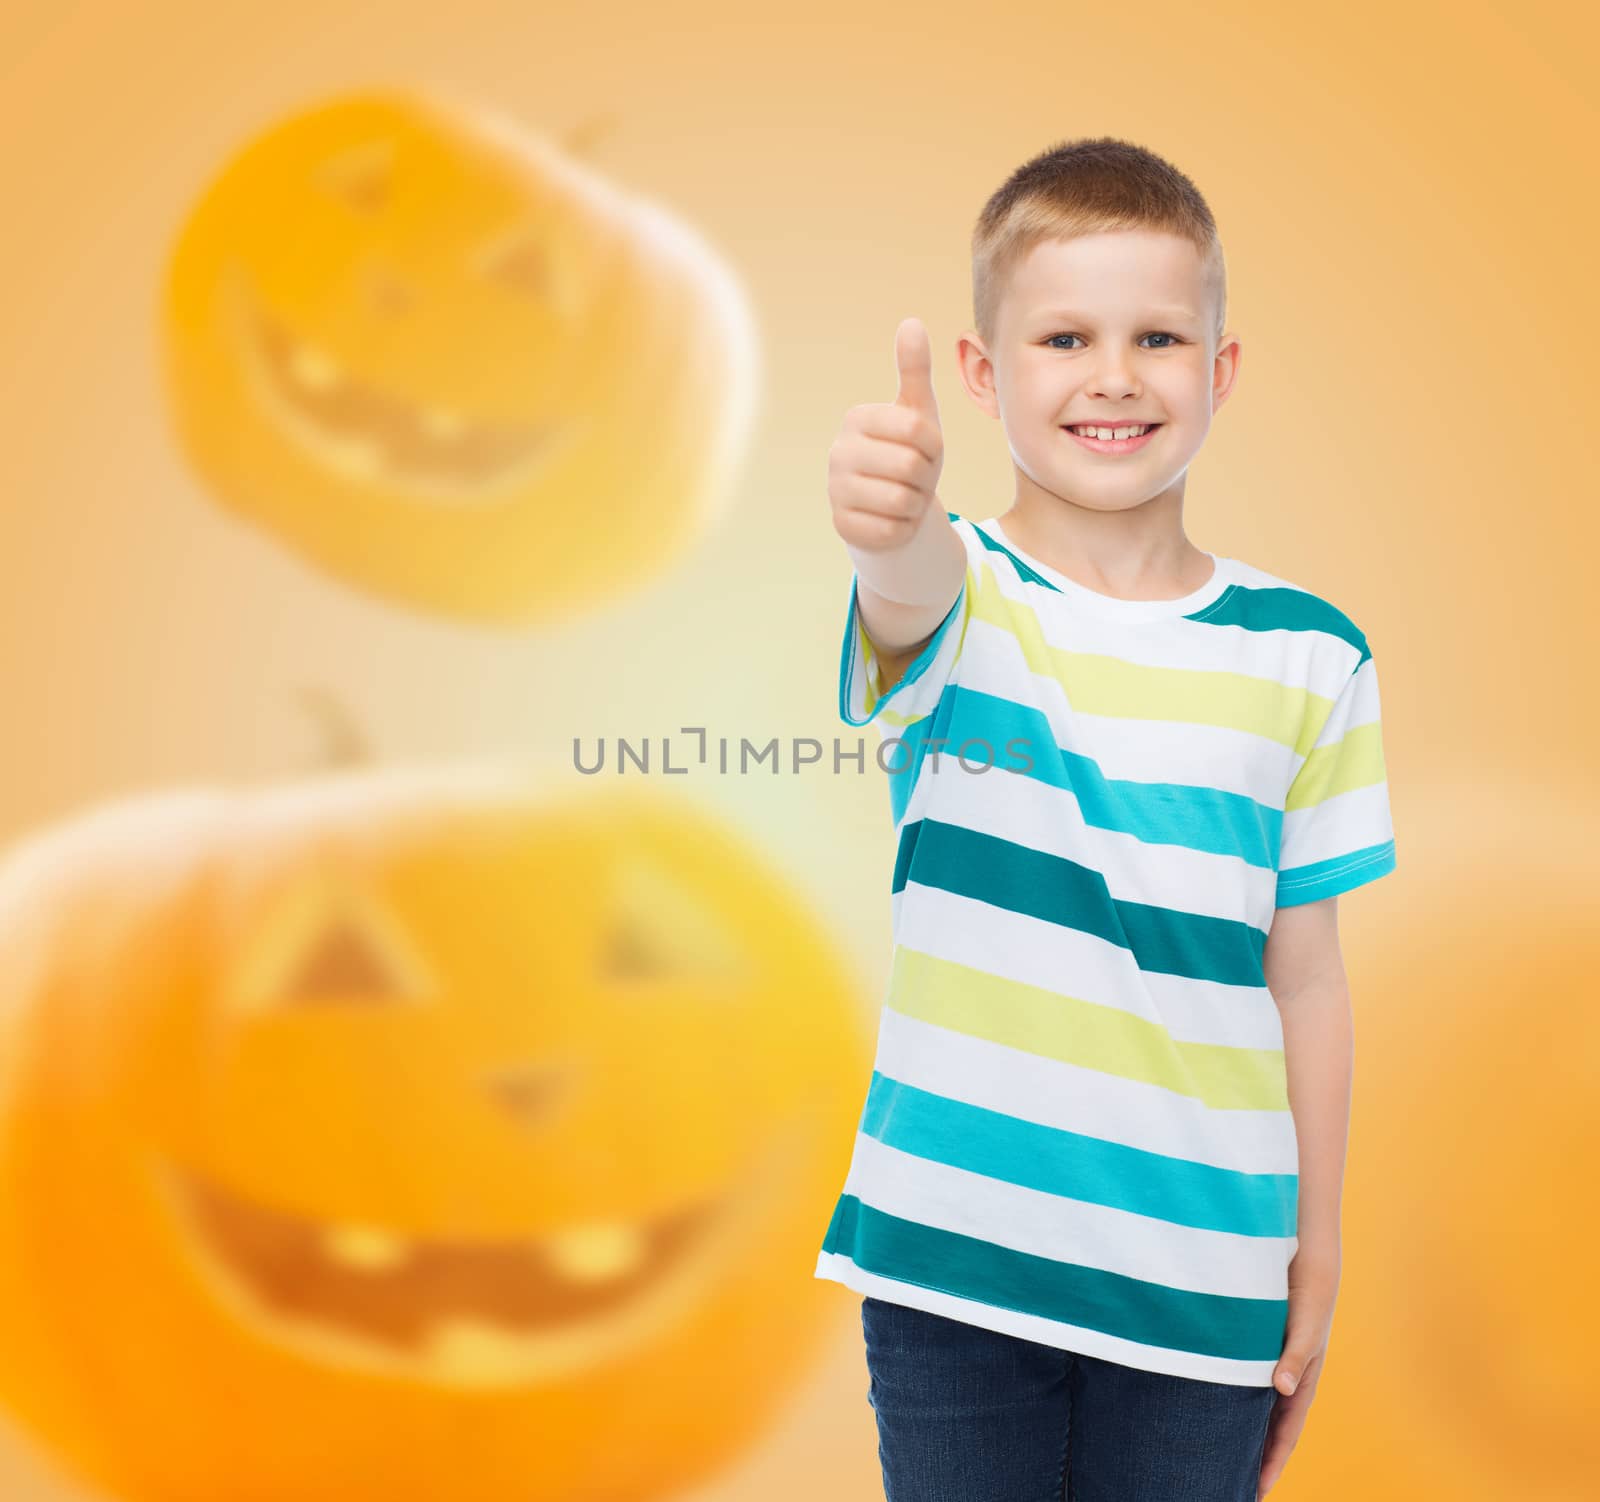 holidays, childhood, happiness, gesture and people concept - smiling little boy showing thumbs up over halloween pumpkins background